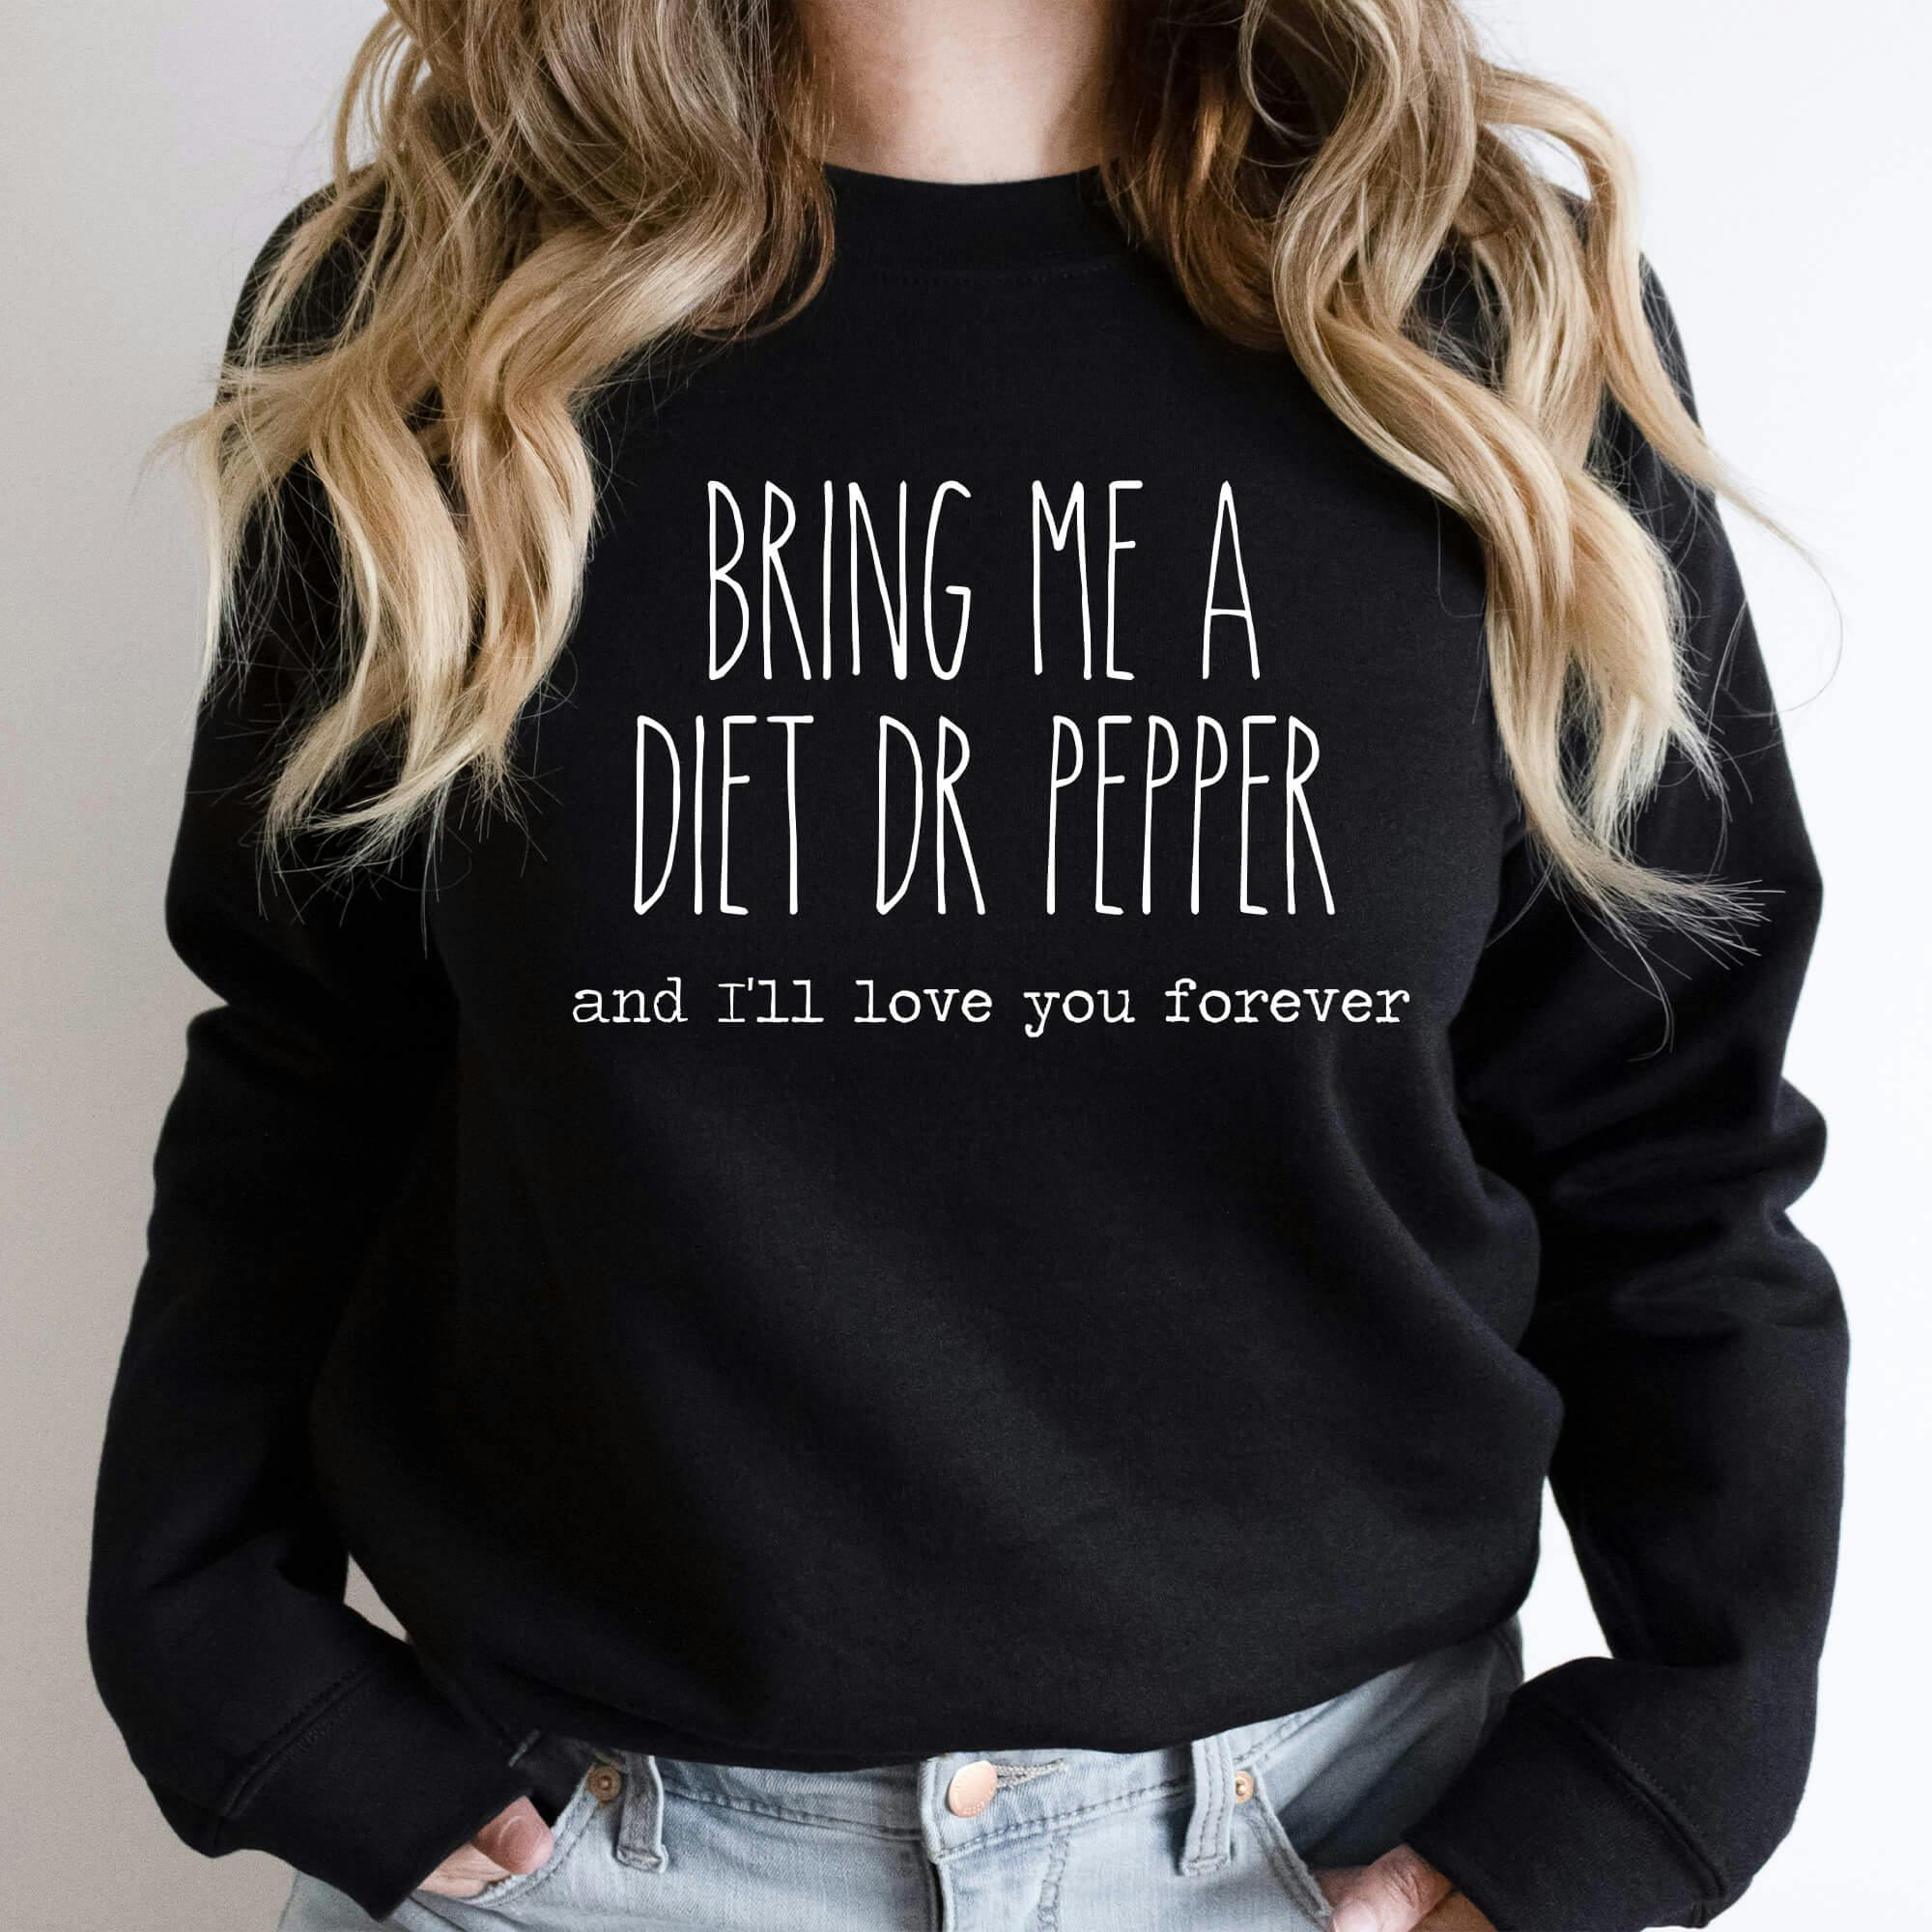 Bring Me A Diet Dr Pepper And I'll Love You Forever Sweatshirt | Fleece Lined Pullover | Diet | Caffeine Lover | Soda Tees | Popular Graphic | Caffeinated Drinks - undefined - BEADSBEE BOUTIQUE